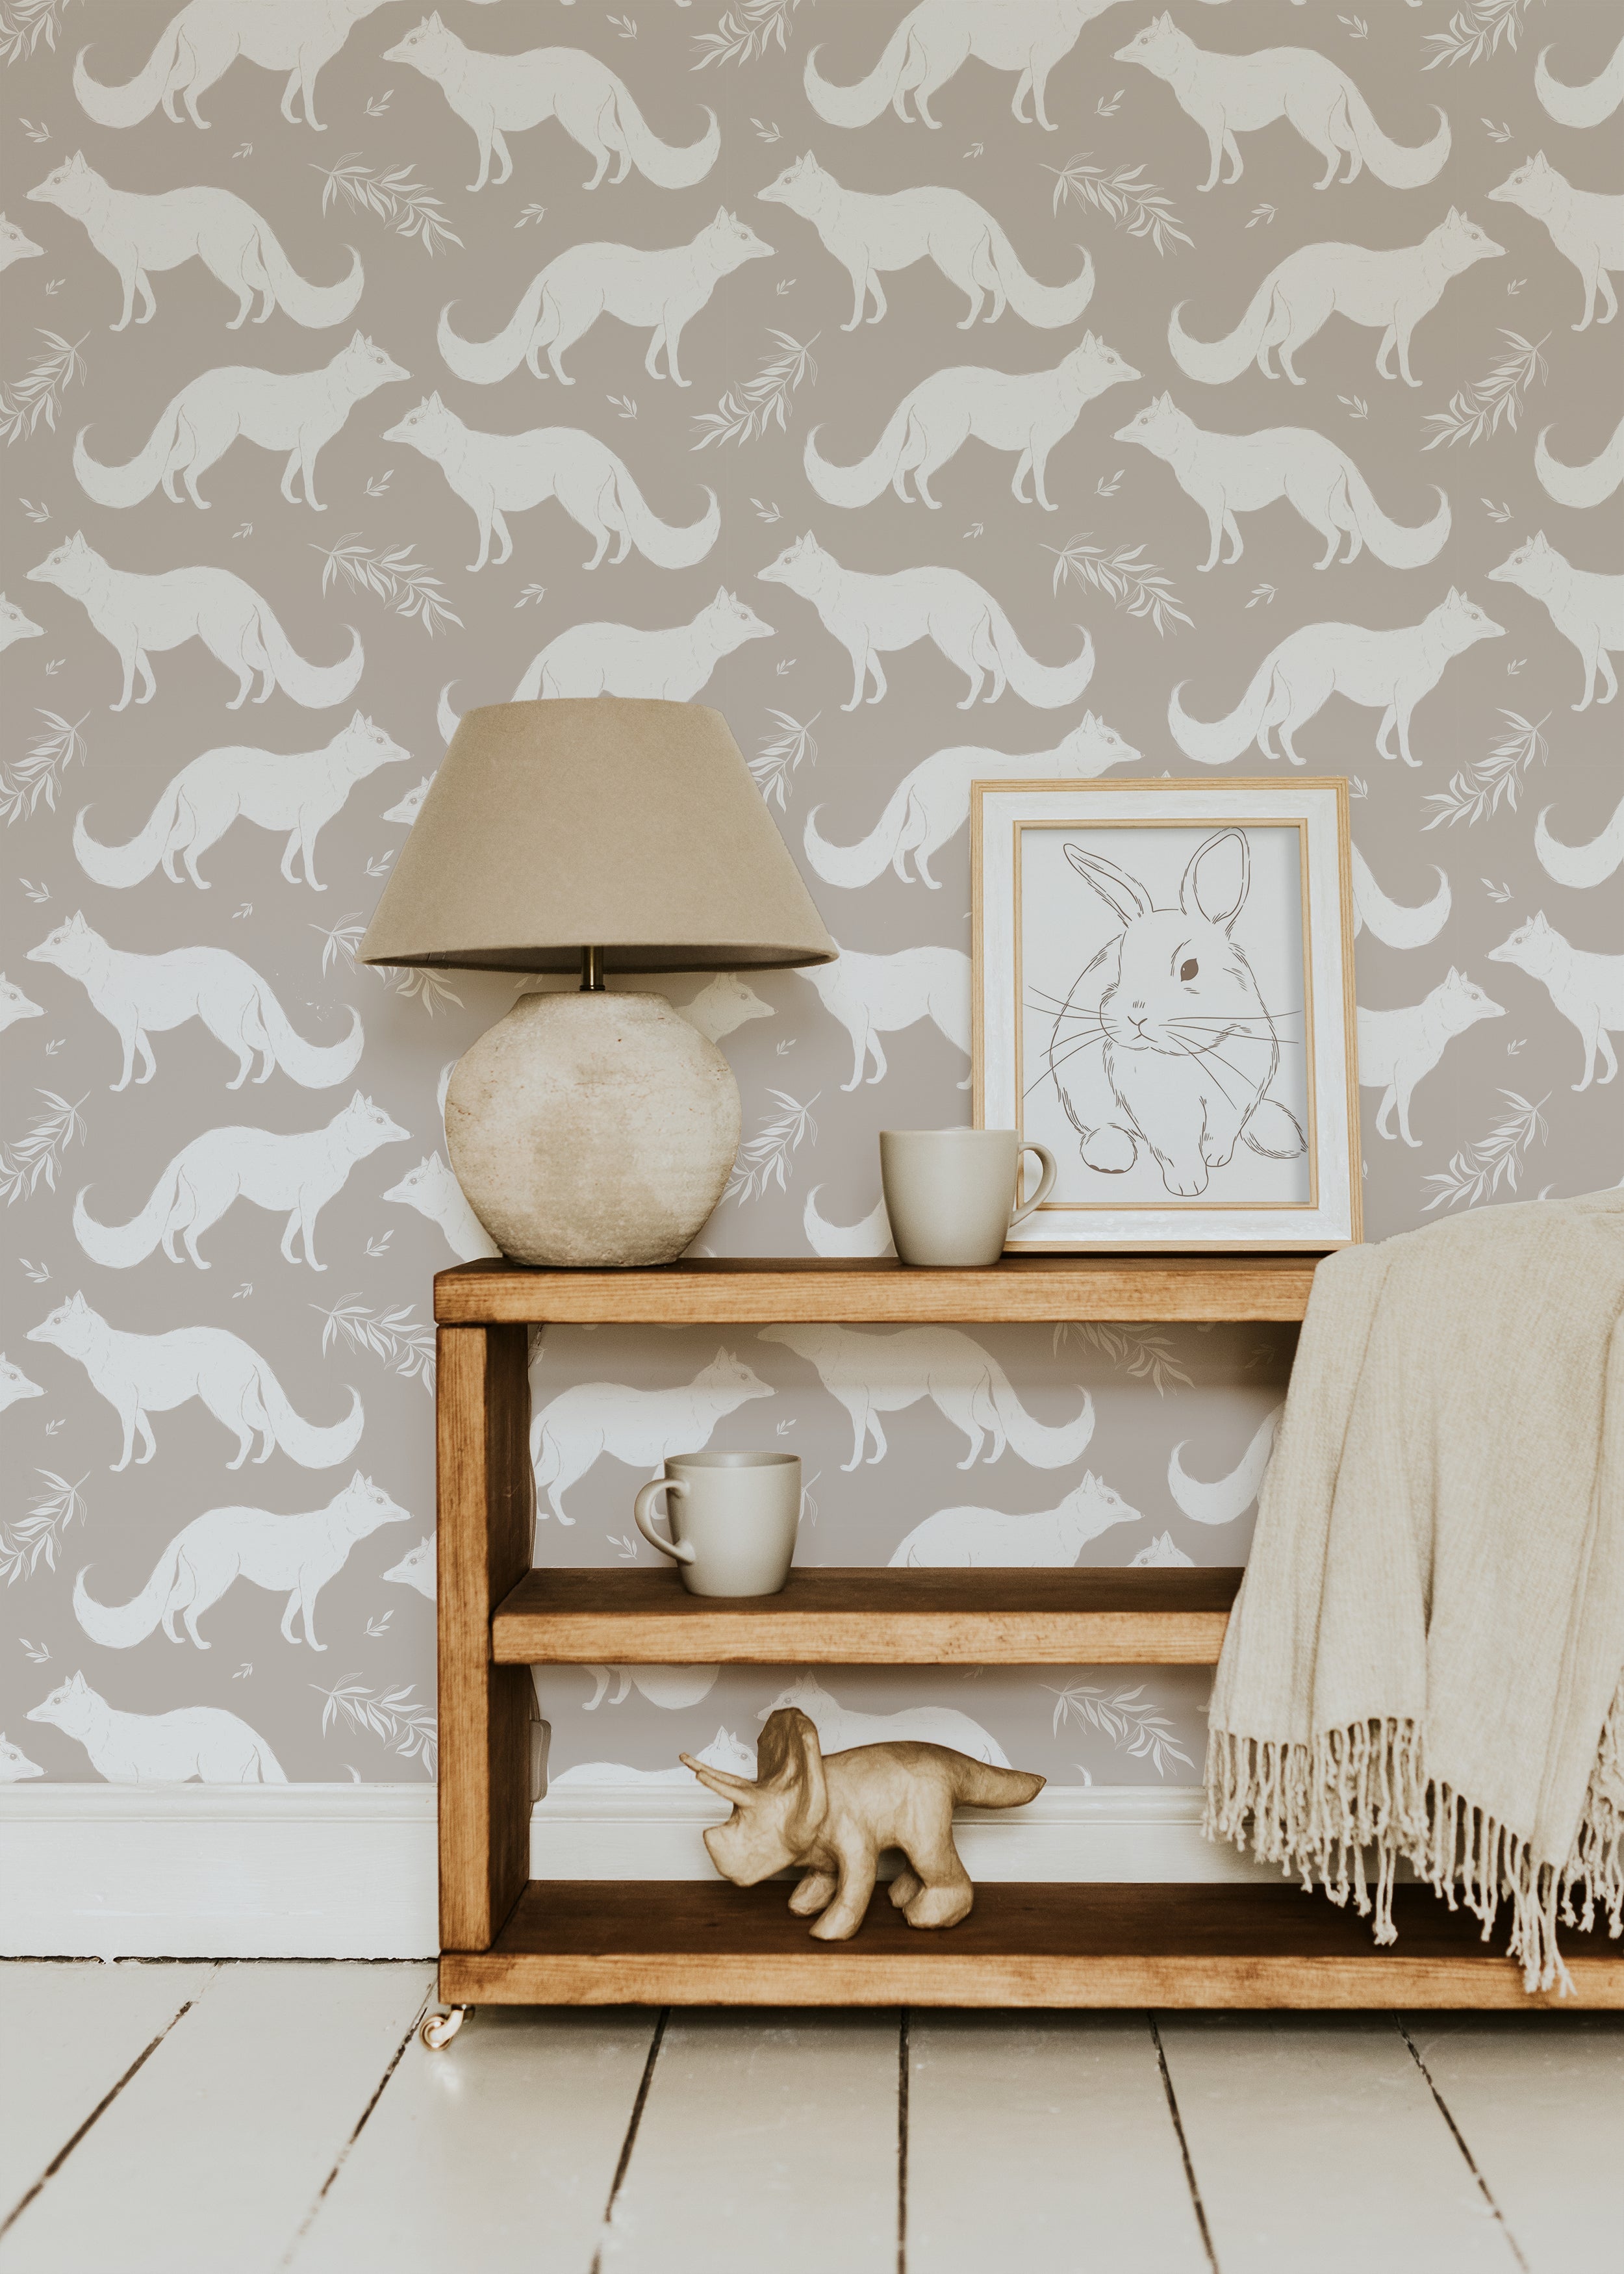 A cozy living room setting with a wooden shelf, ceramic lamp, and framed rabbit illustration in front of a warm beige wallpaper featuring white foxes and delicate foliage patterns, creating a charming and serene ambiance.